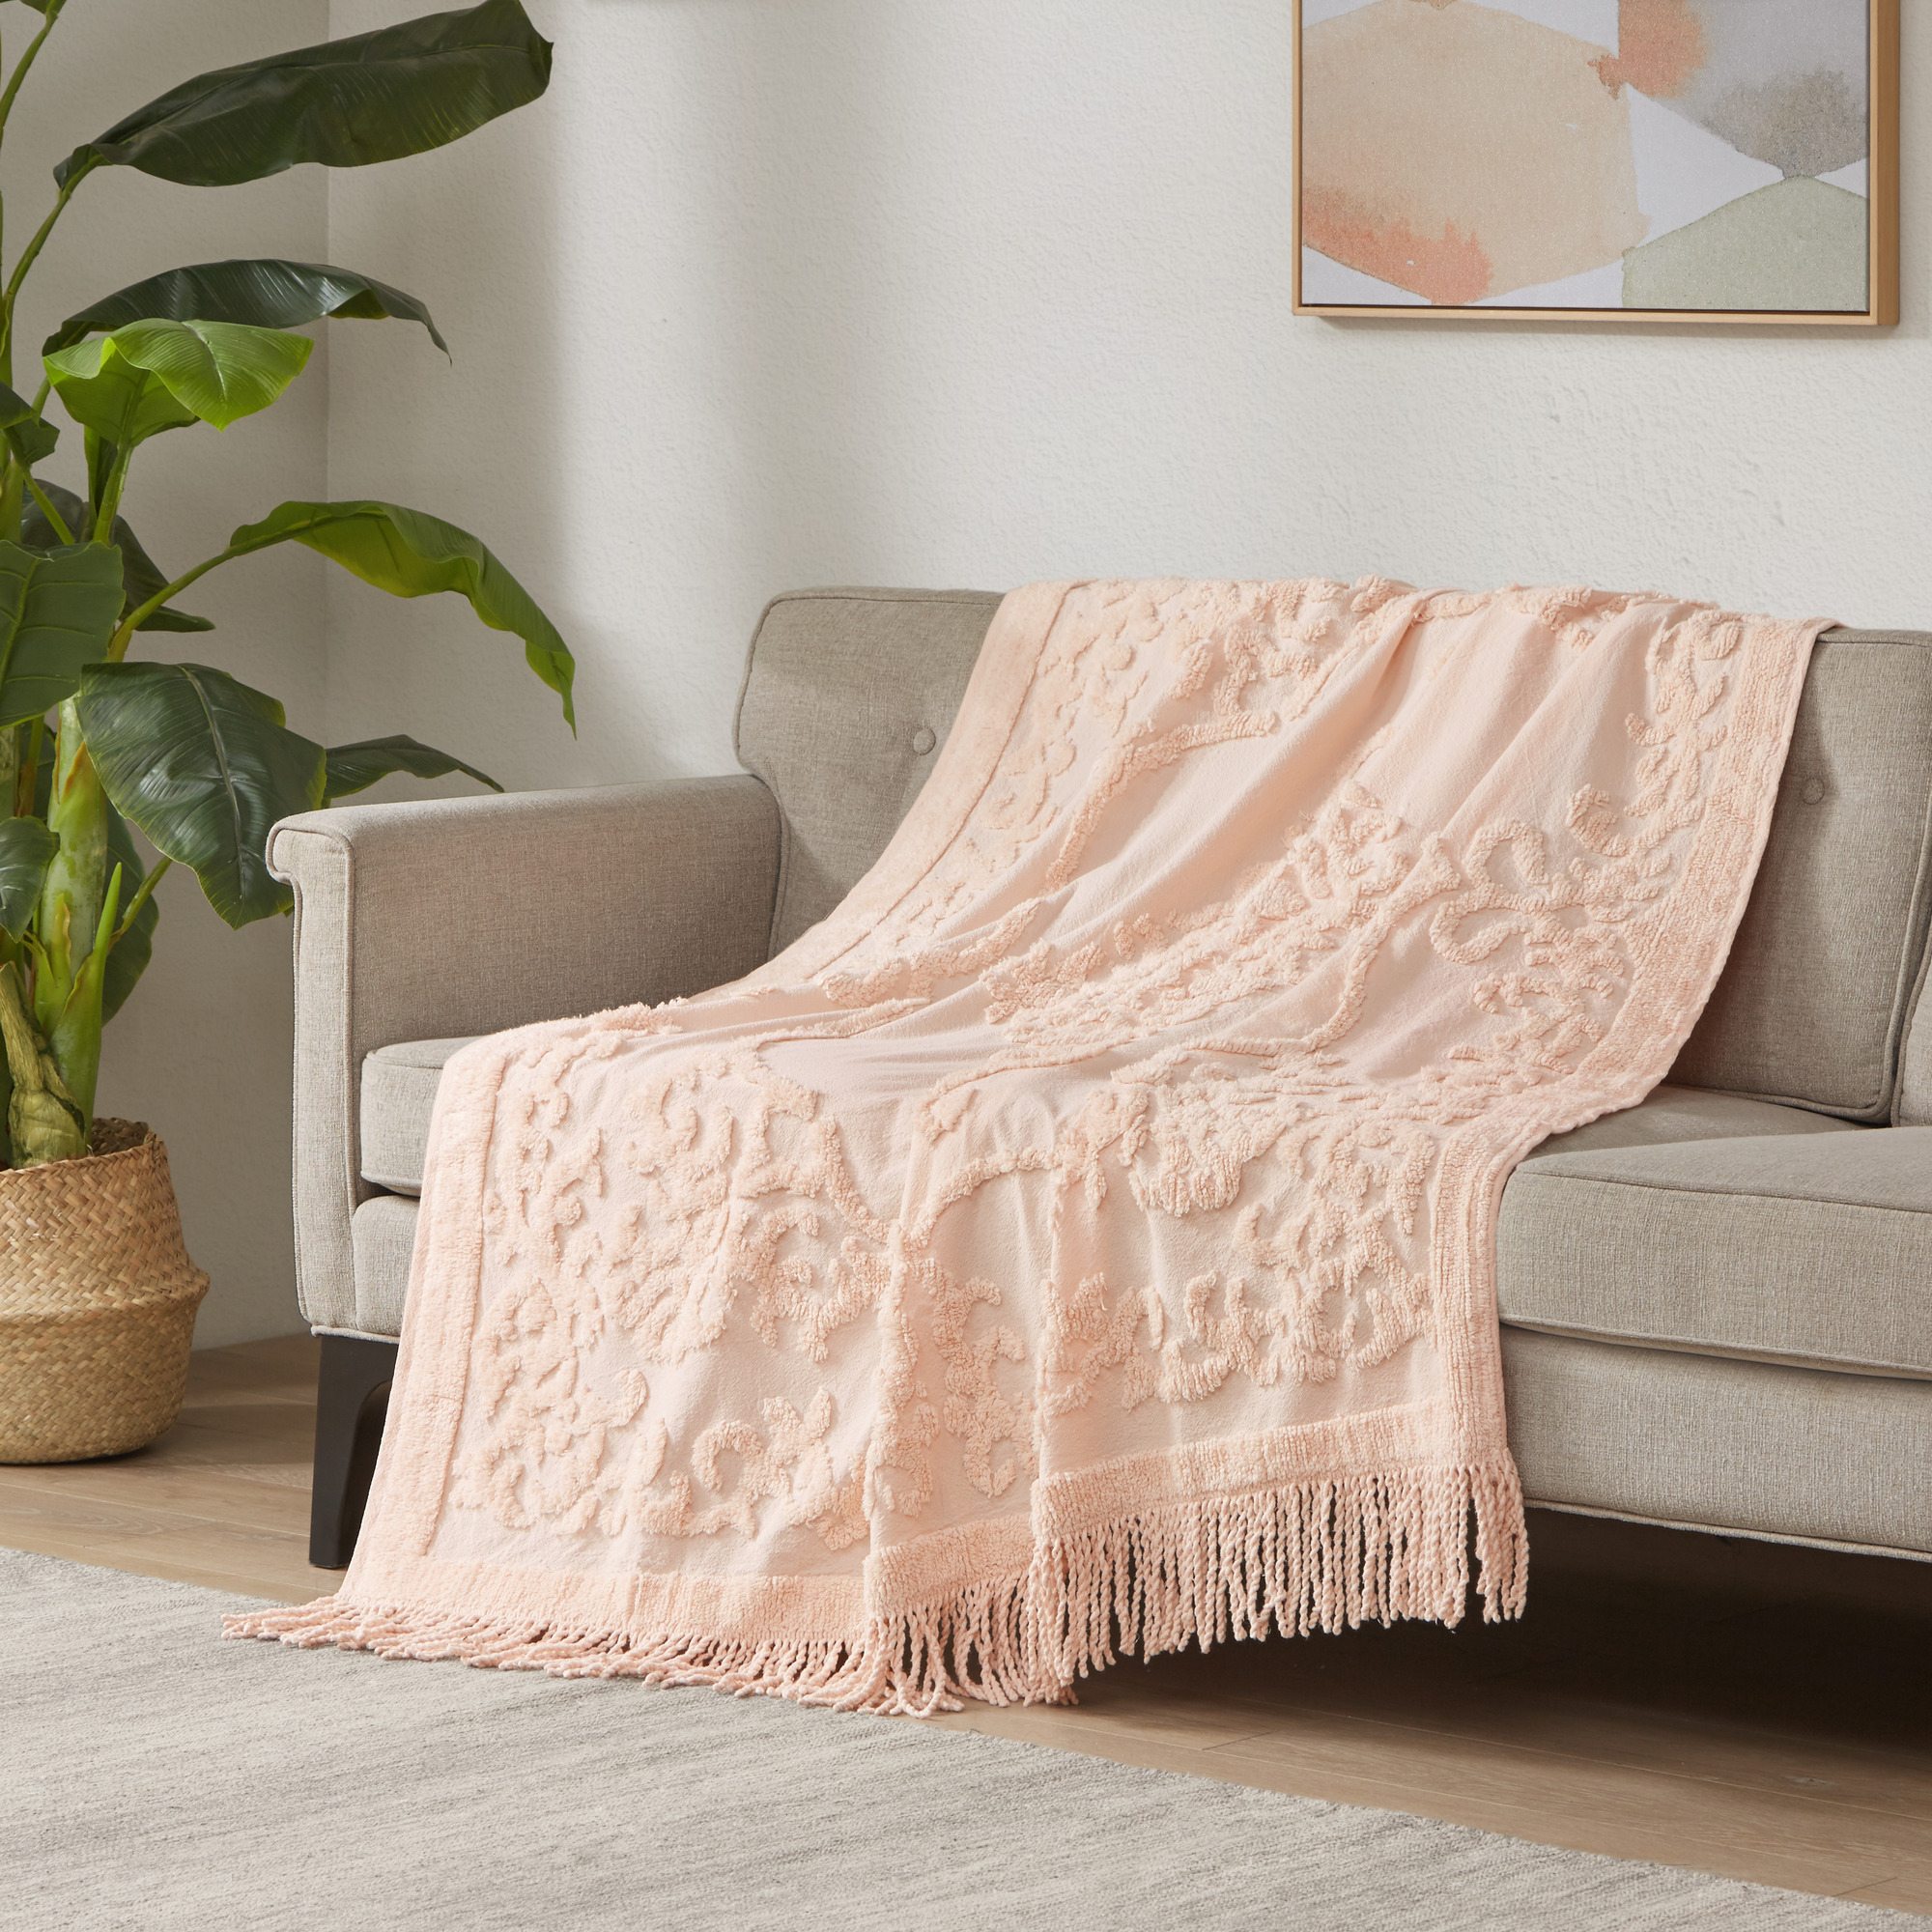 Madison Park Mila 100 Percent Cotton Tufted Throw Blanket, 50" x 60" Pink - image 1 of 8